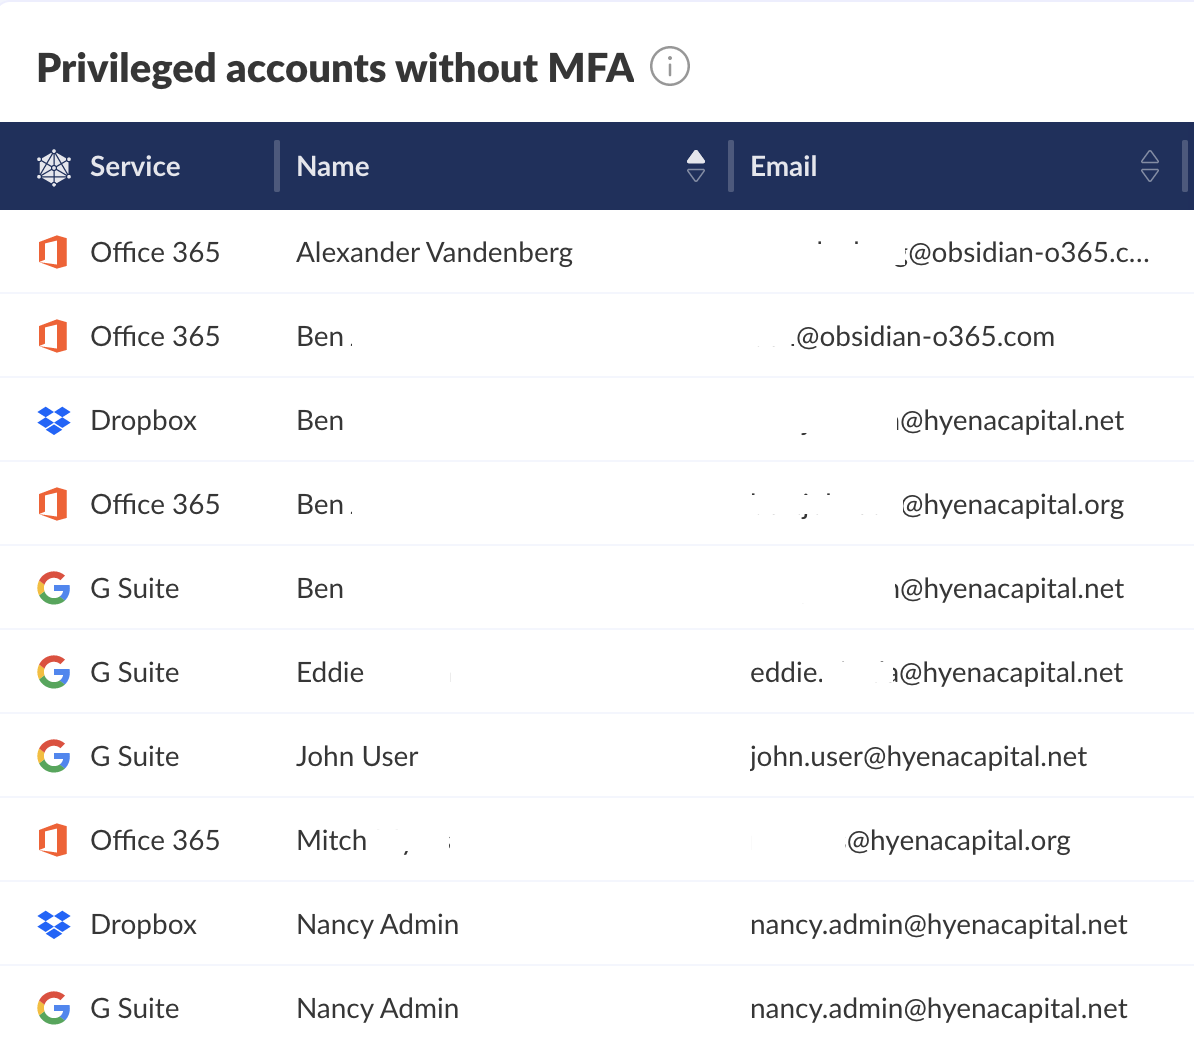 Privileged accounts without MFA